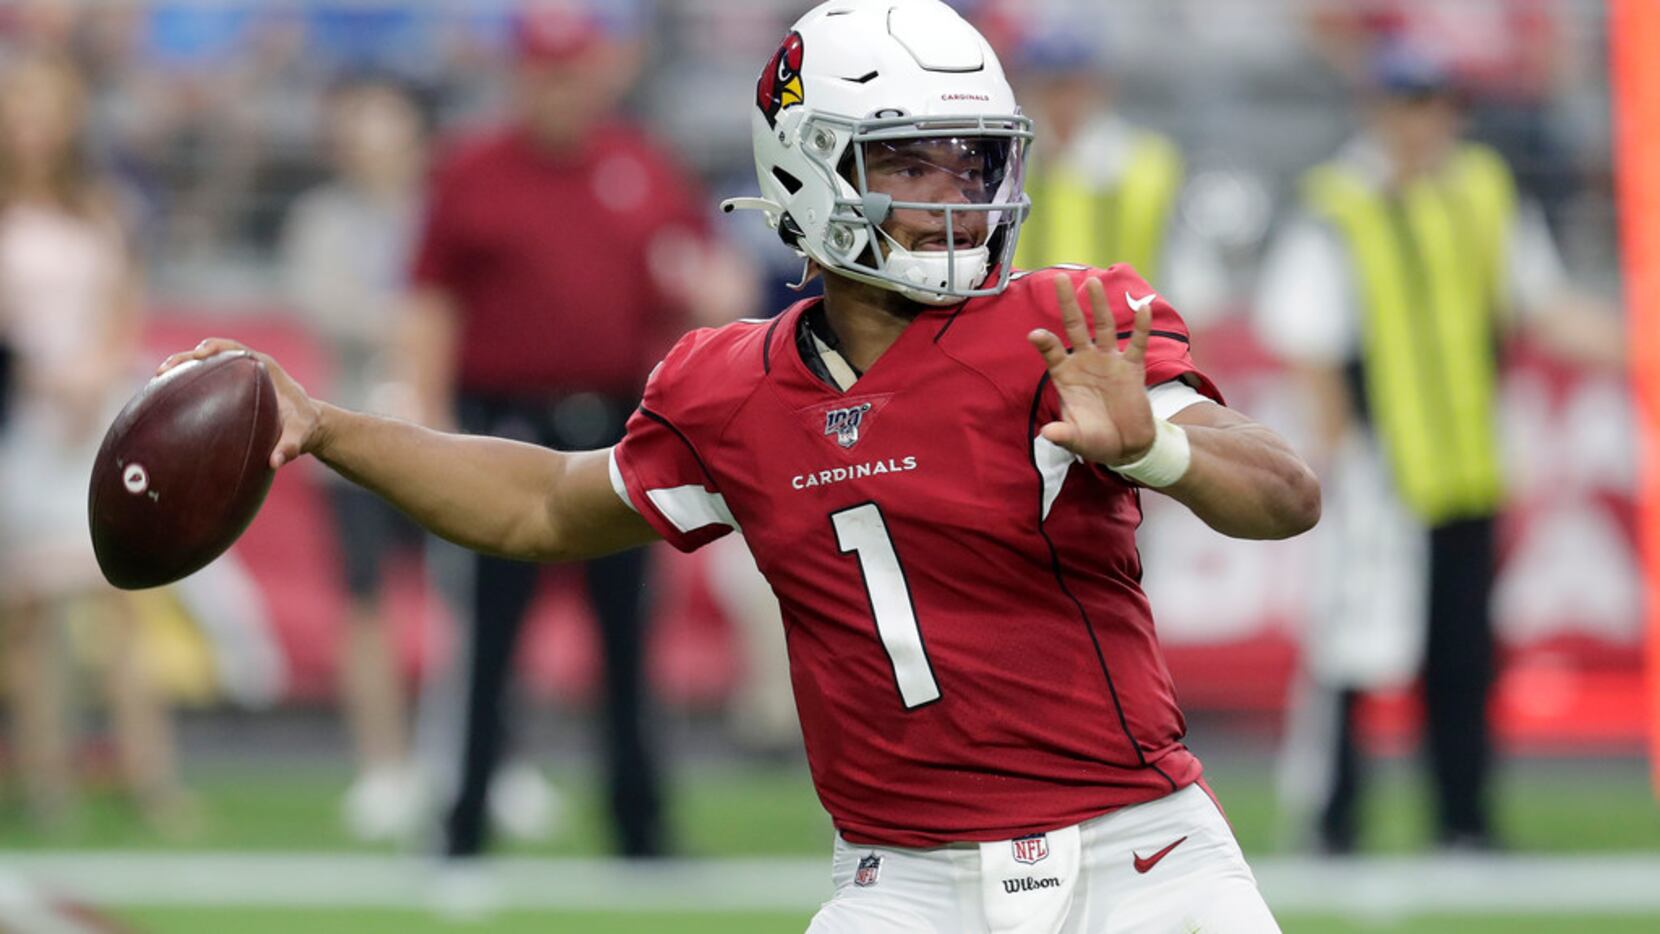 Kyler Murray leads 18-point comeback to force tie in NFL debut vs. Detroit